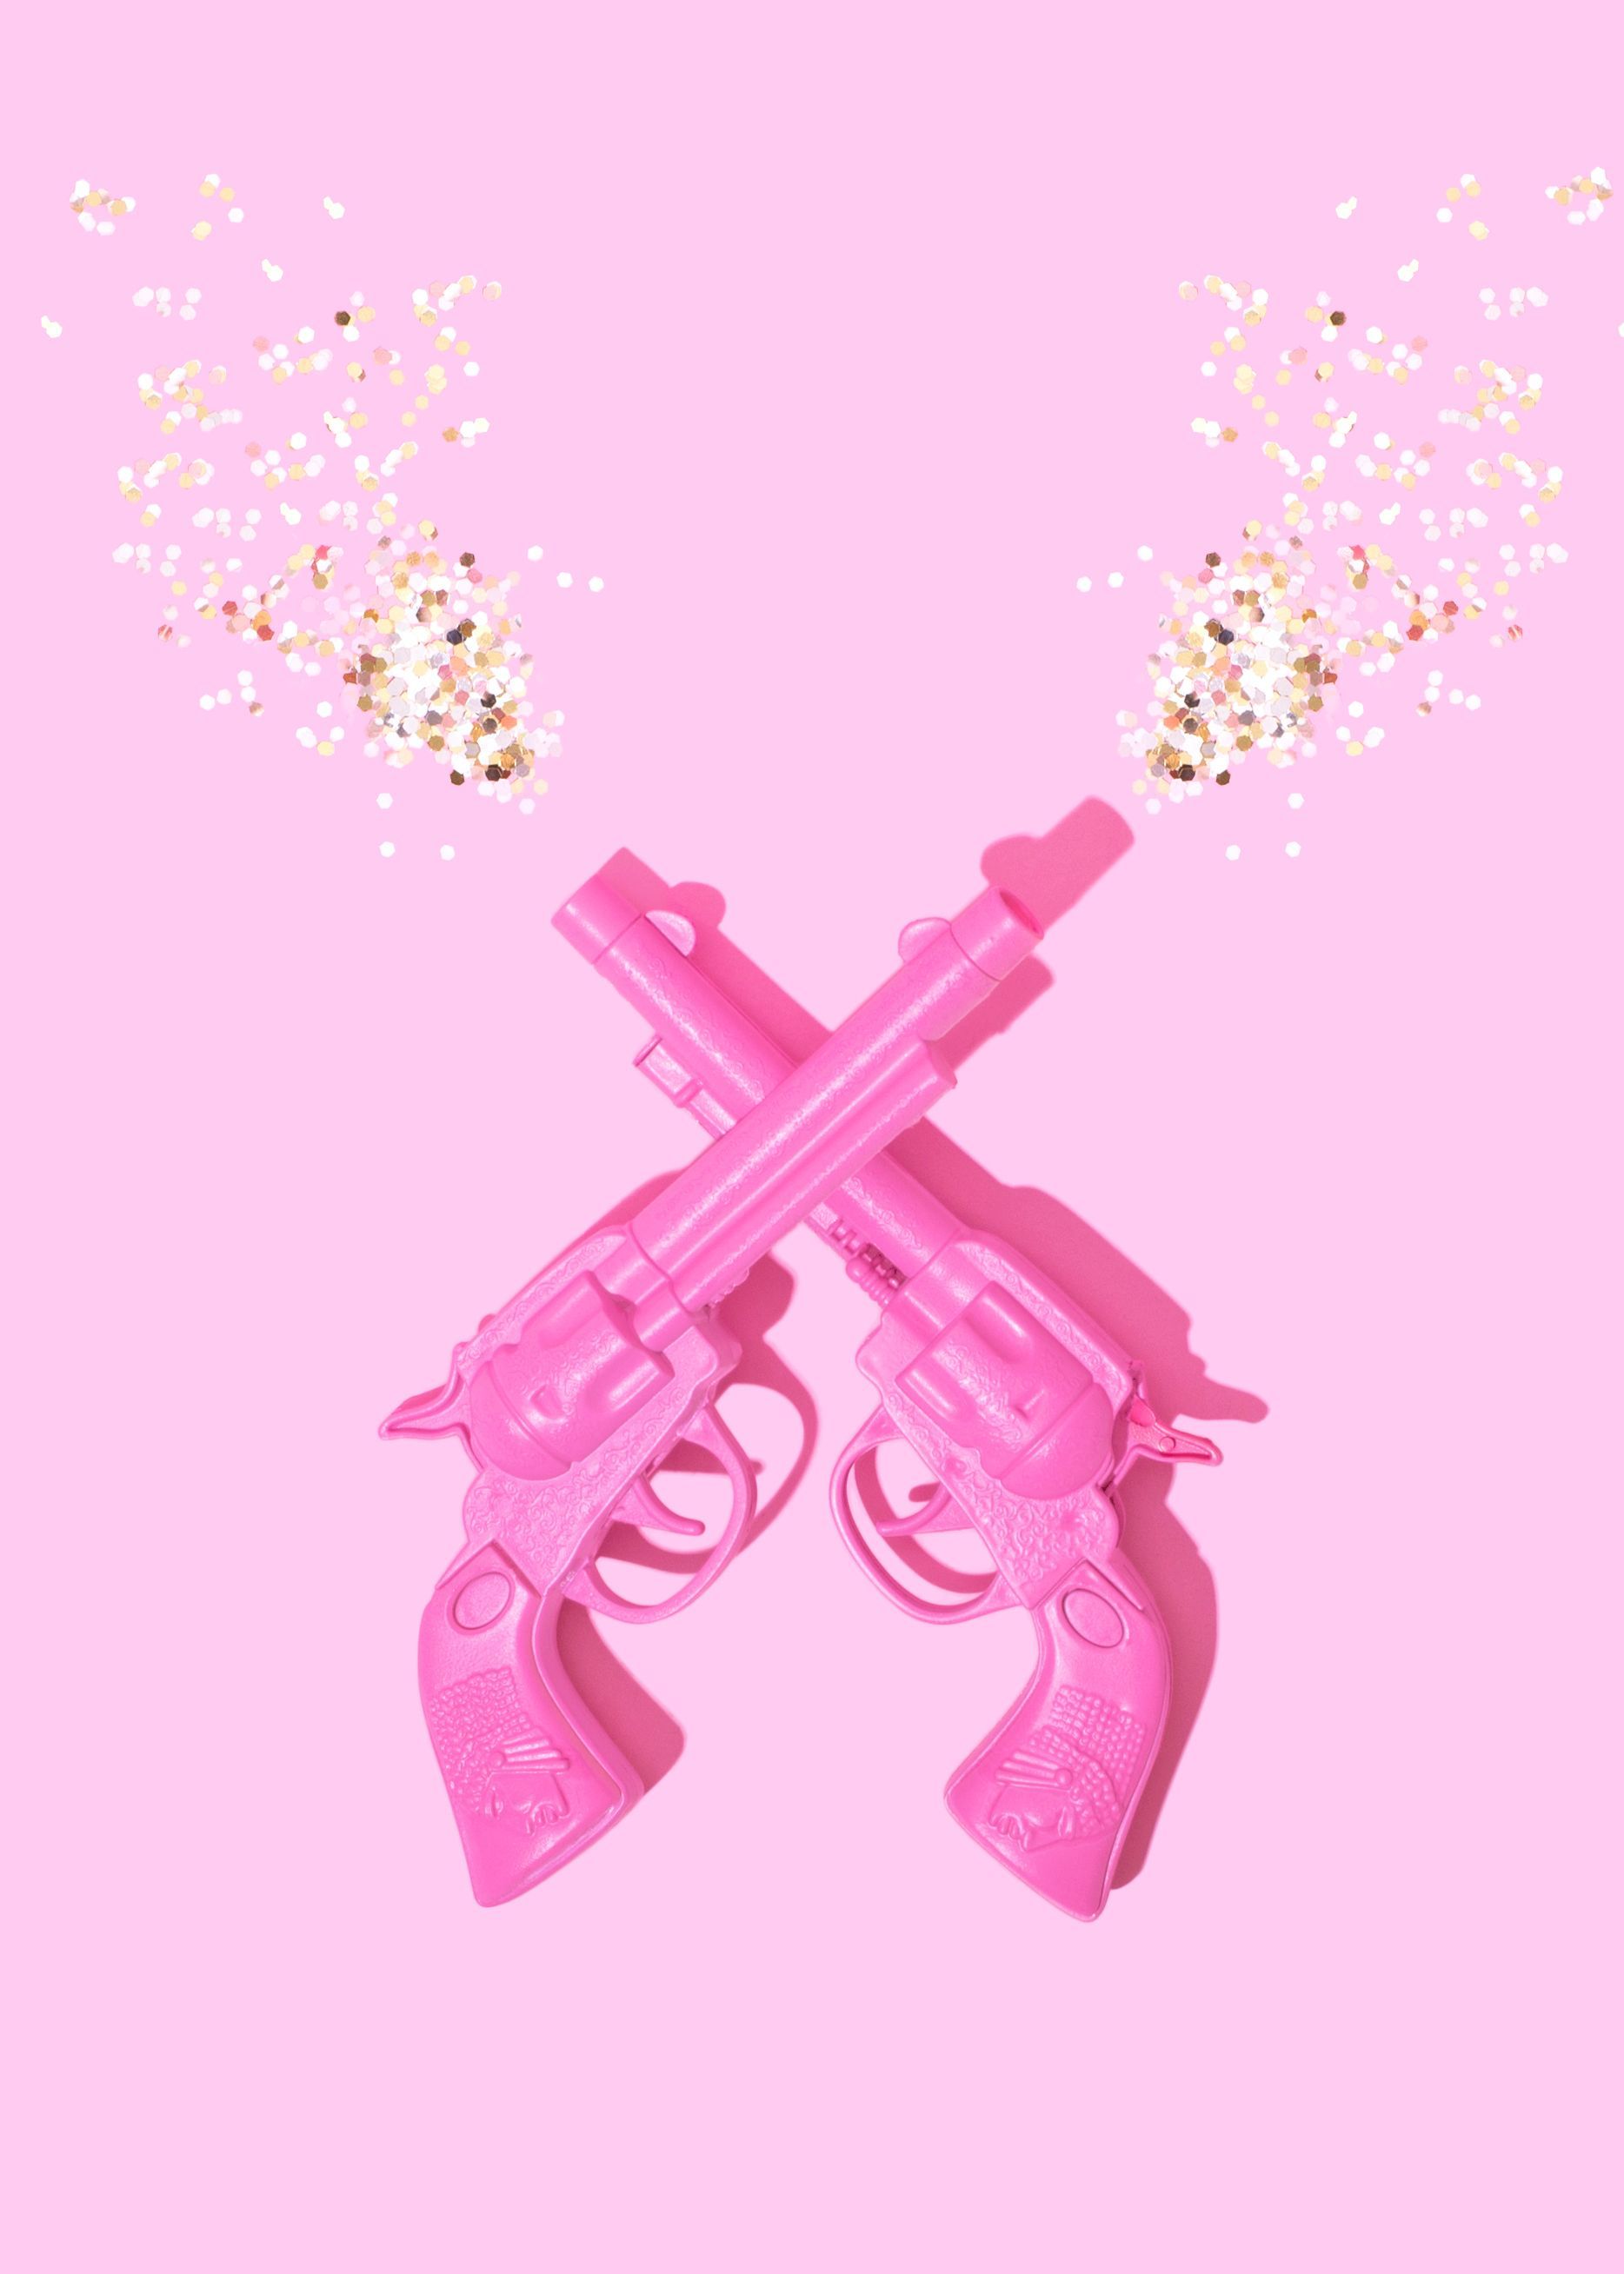 Baddie Wallpaper With Guns Heist Wallpaper Sun / We have a massive amount of HD image that will make your computer or smartphone